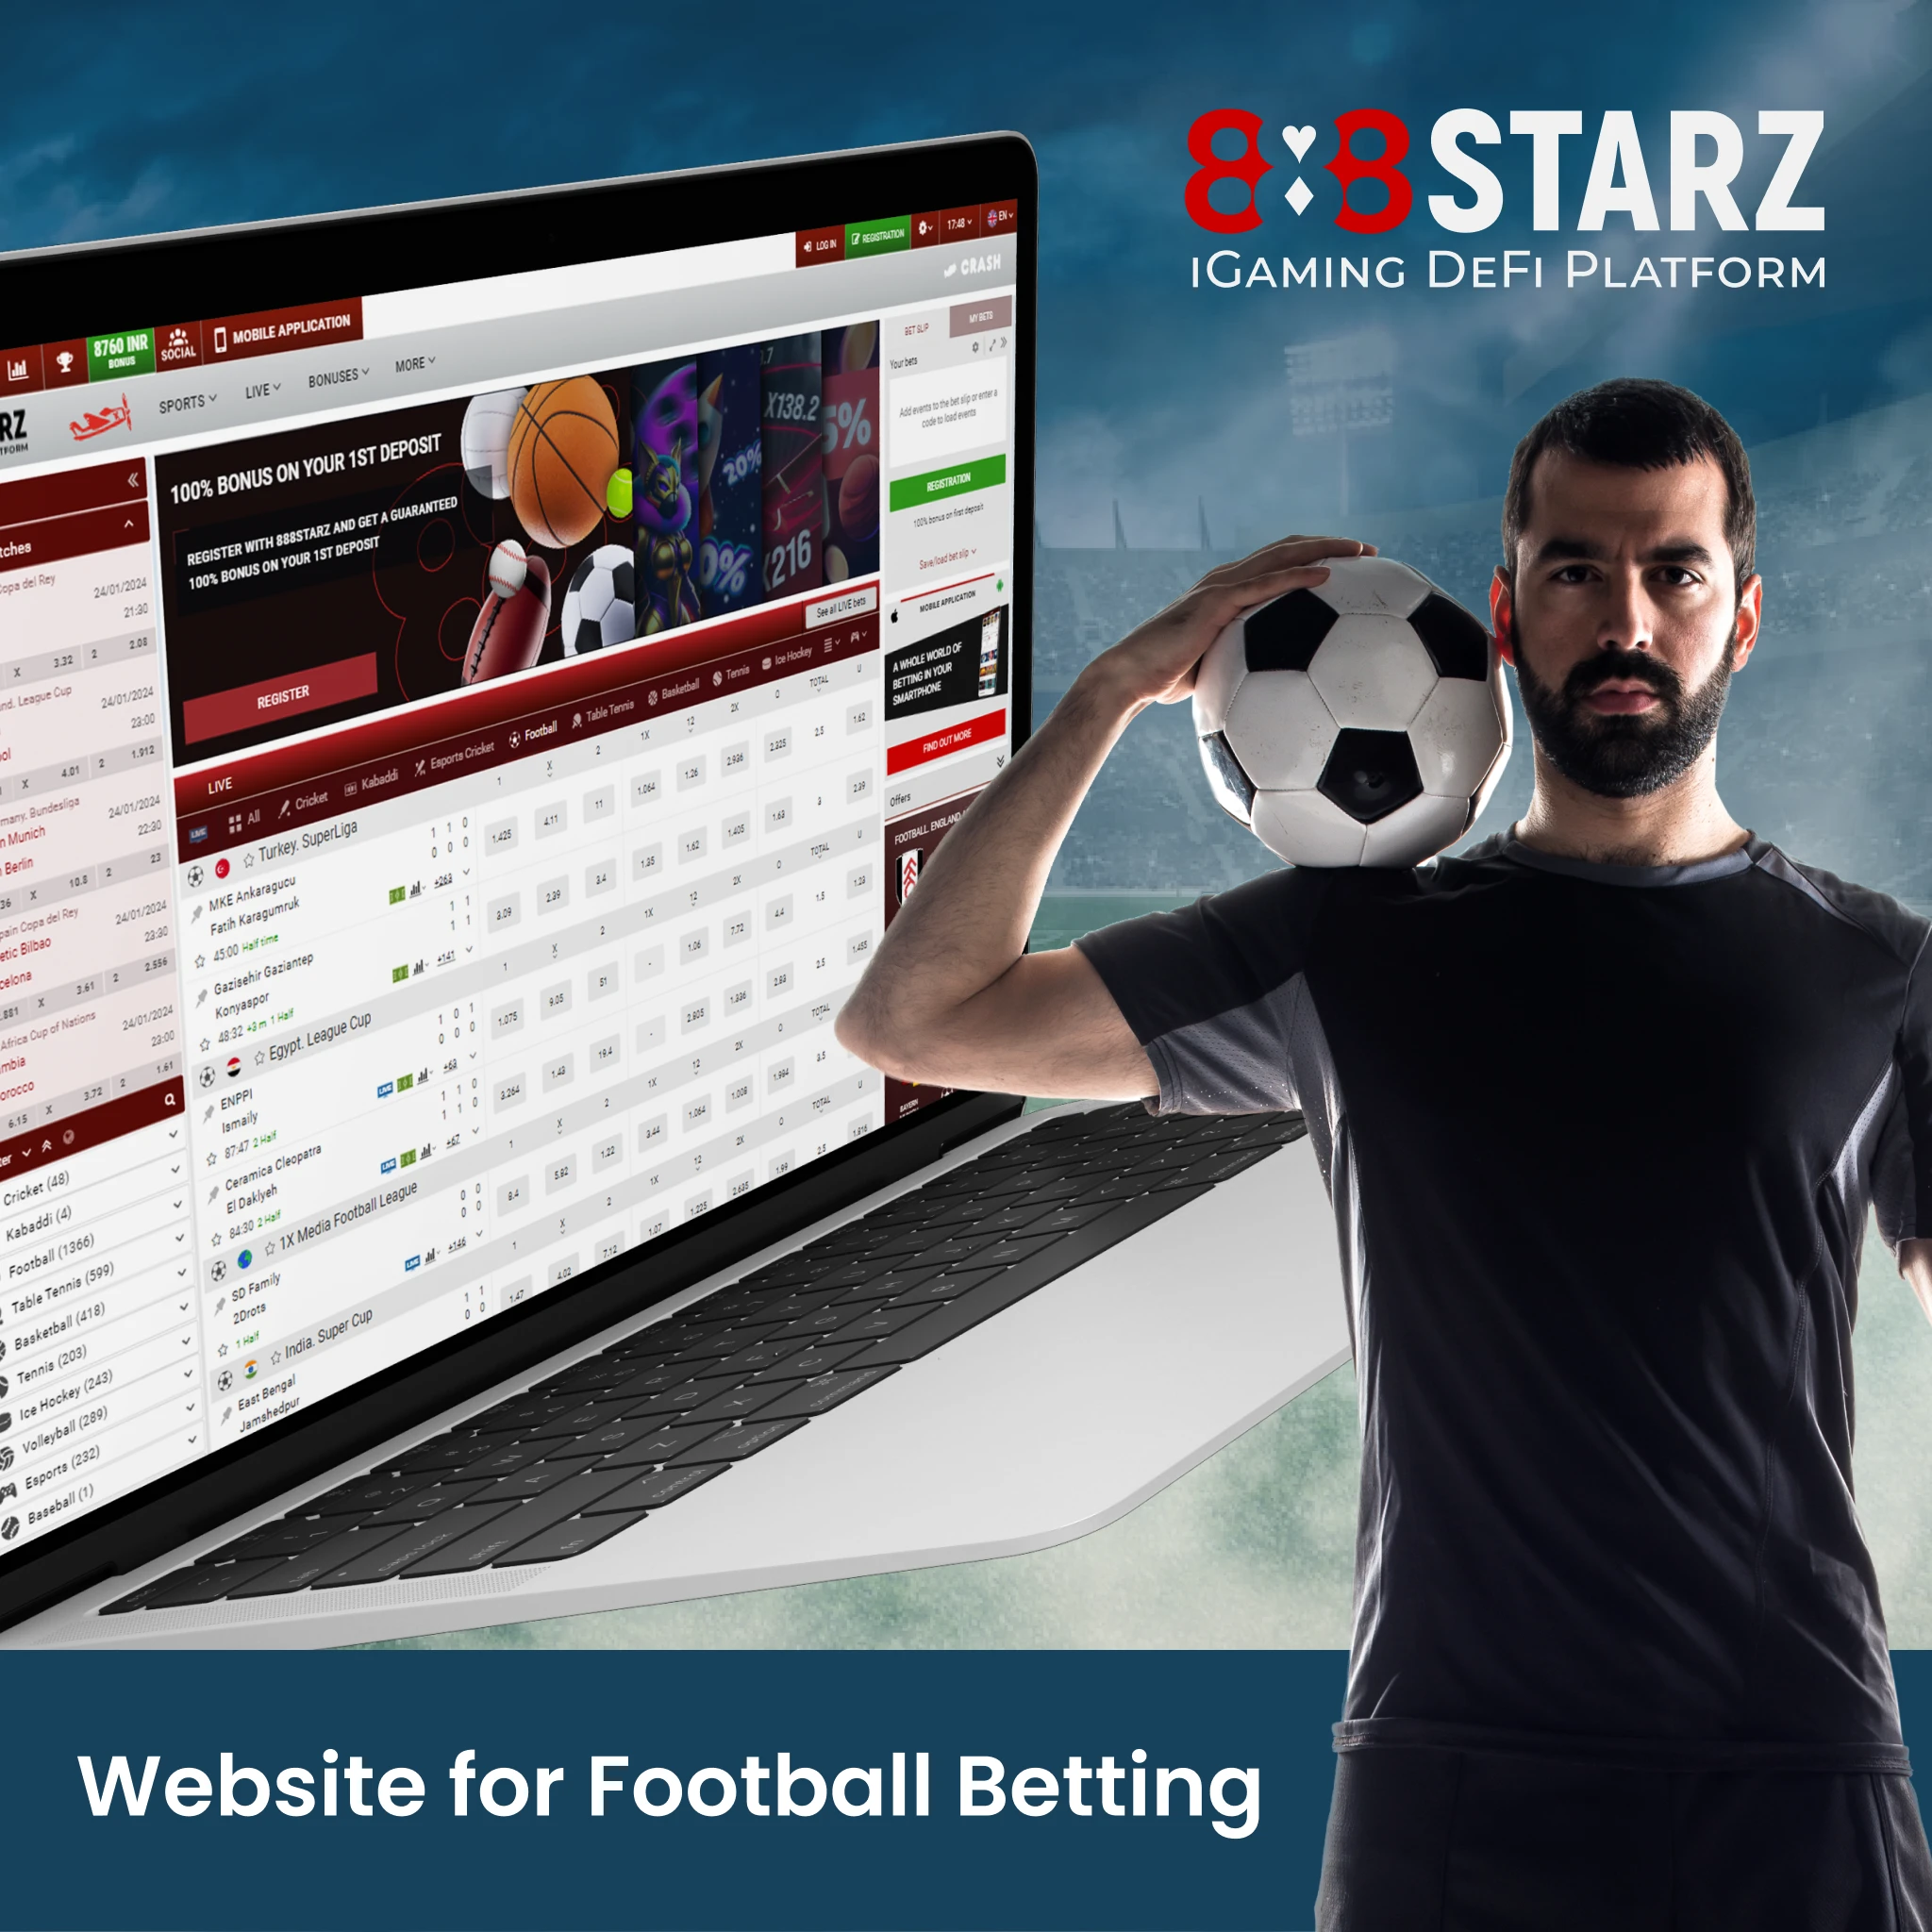 888Starz supports hindi, making online football betting easier.